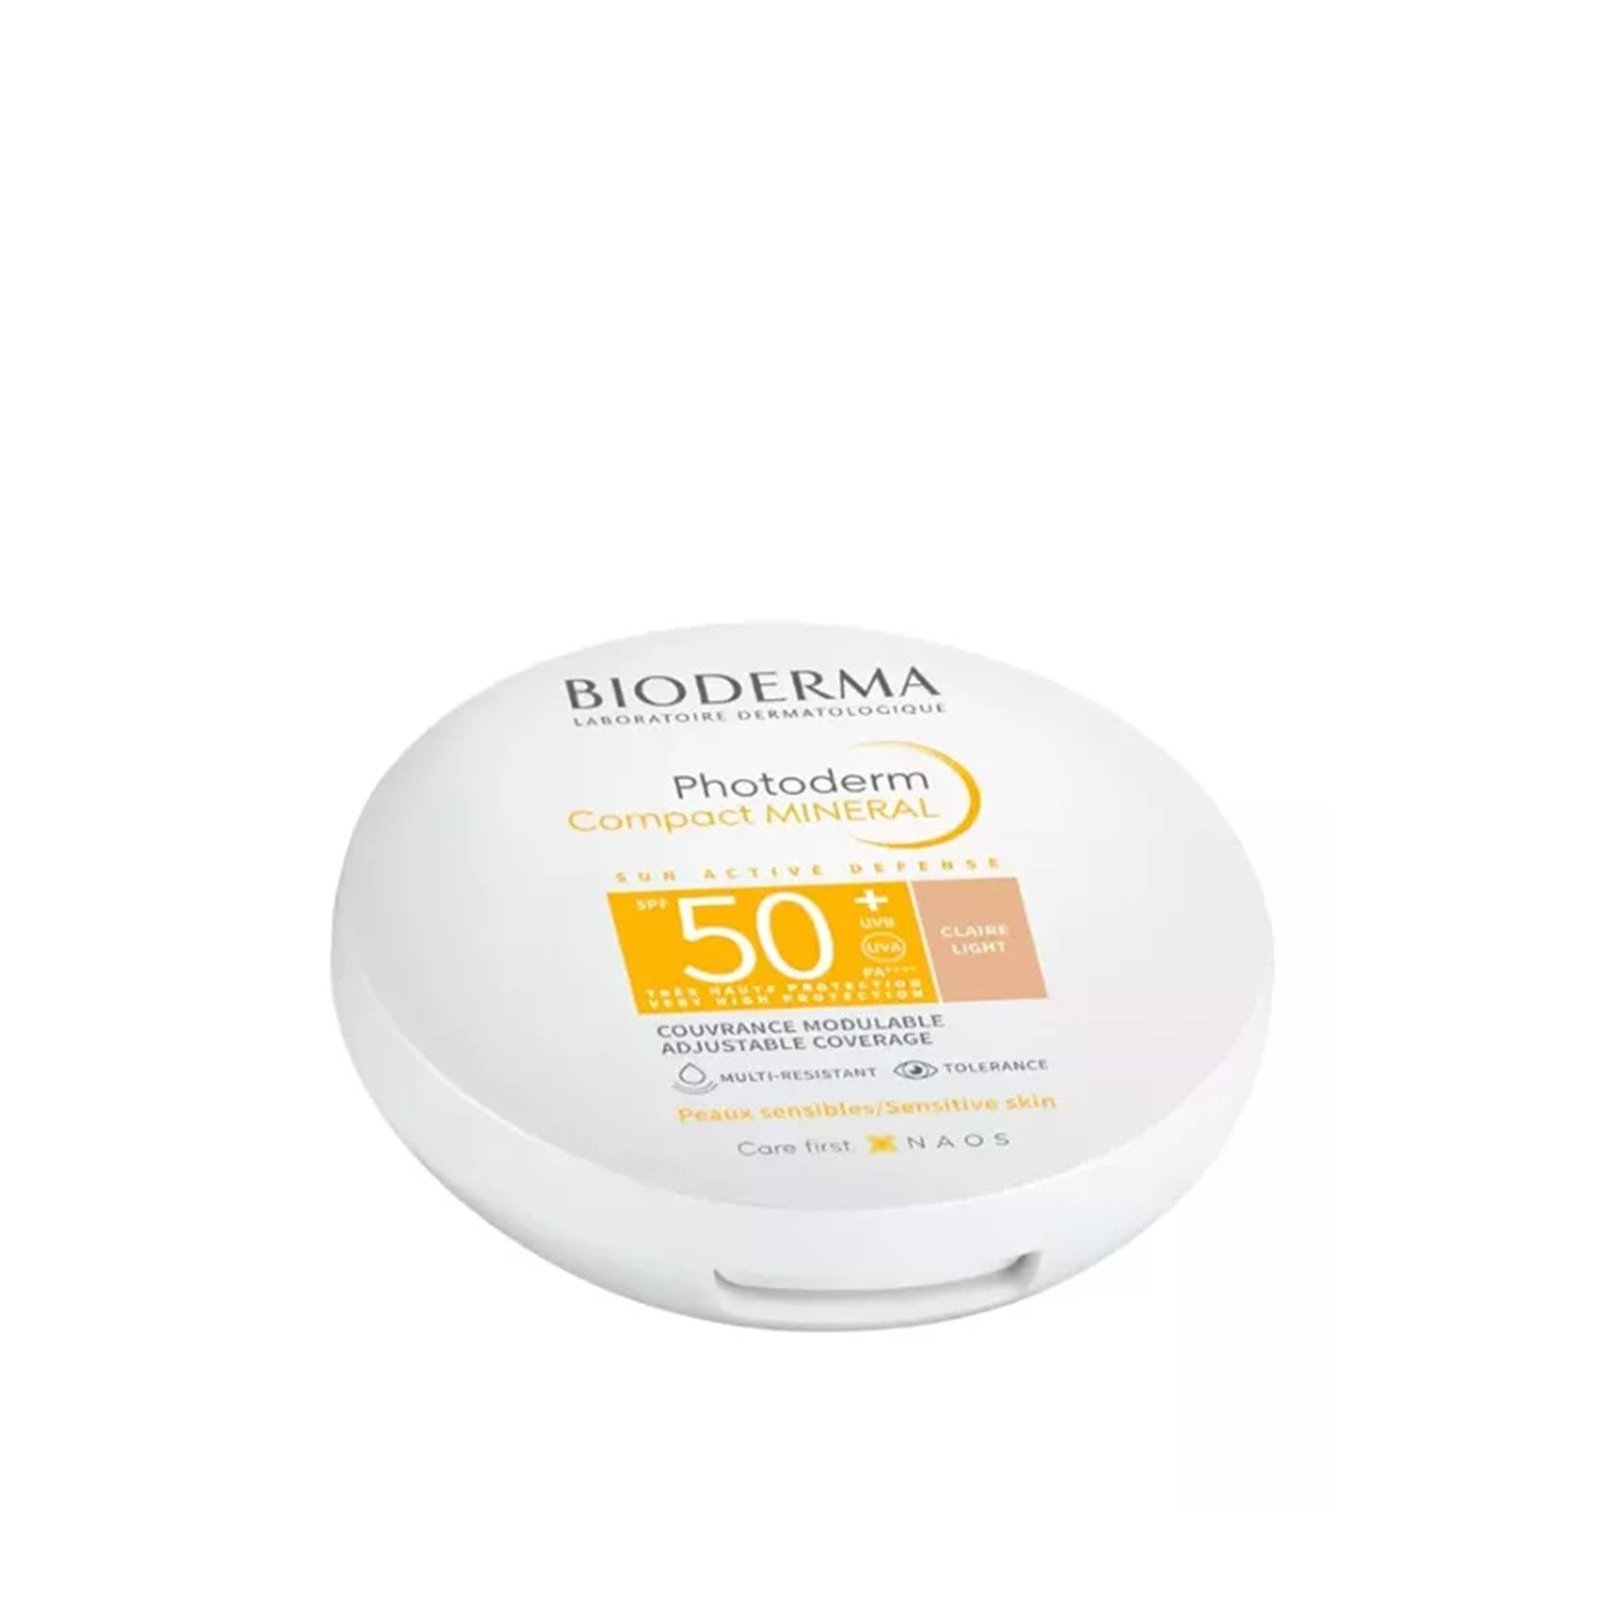 Bioderma Photoderm Compact Mineral SPF50+ Claire 10g